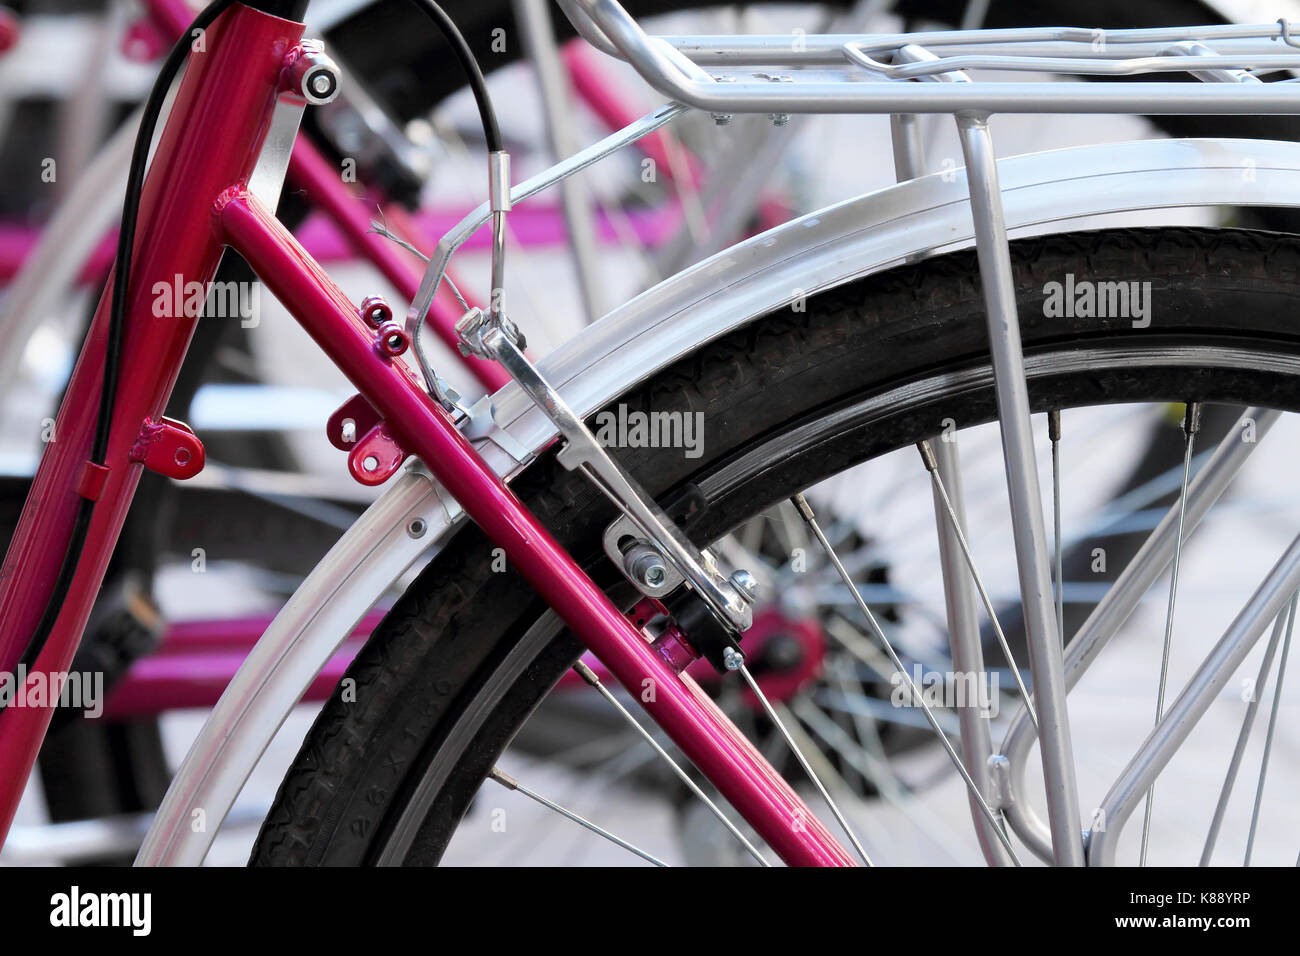 Bicycle detail in pink. Spain. Stock Photo